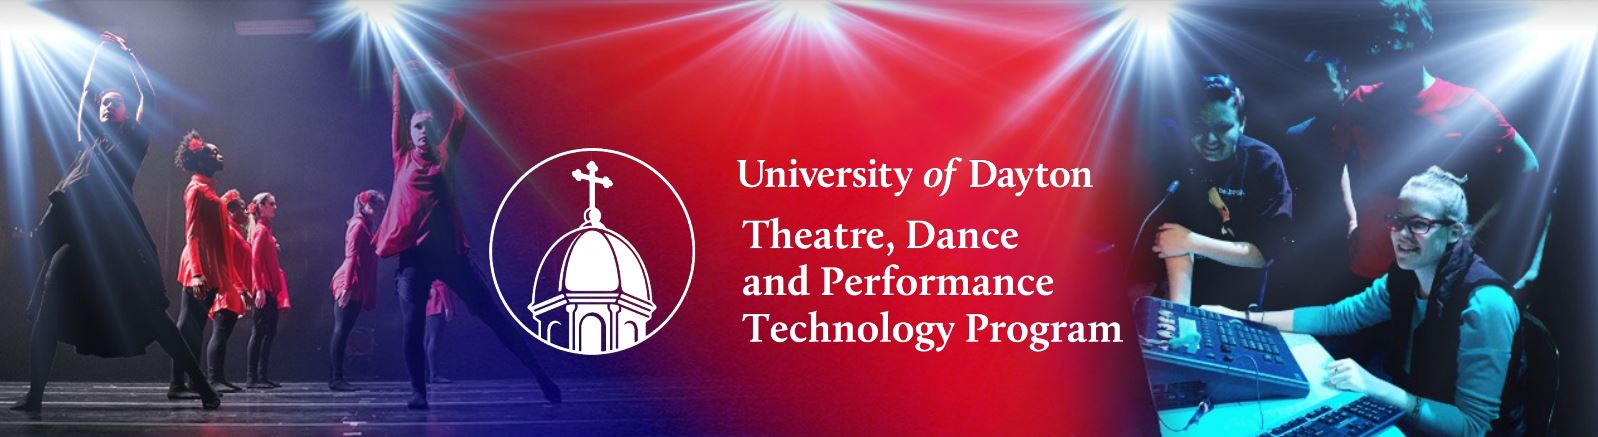 Theatre, Dance, and Performance Technology